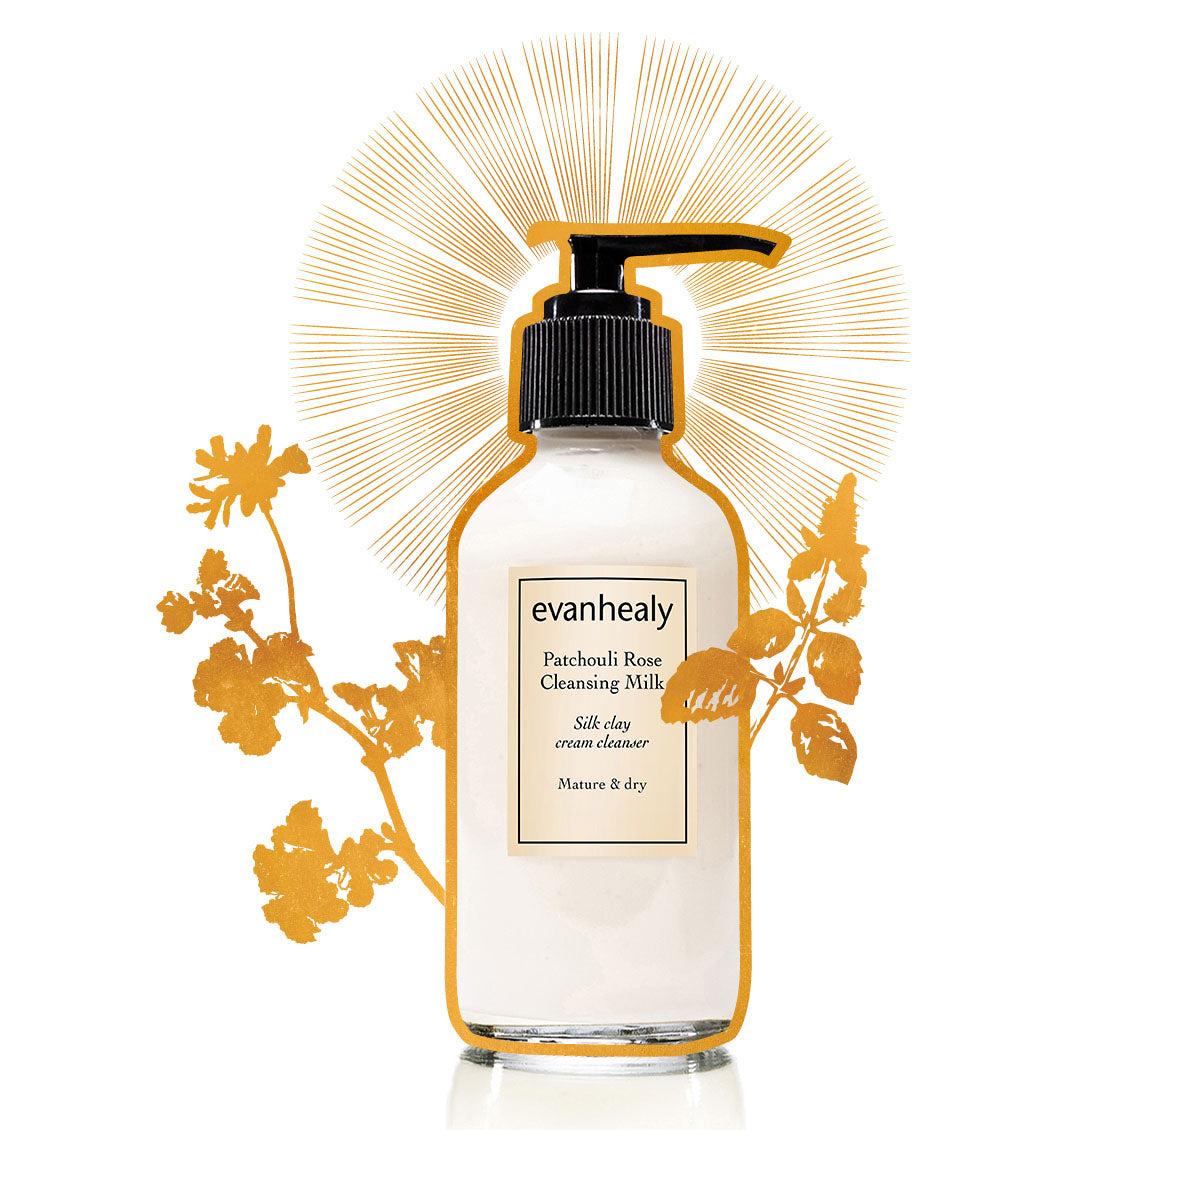 evanhealy patchouli rose cleansing milk facial cleanser gilded graphic